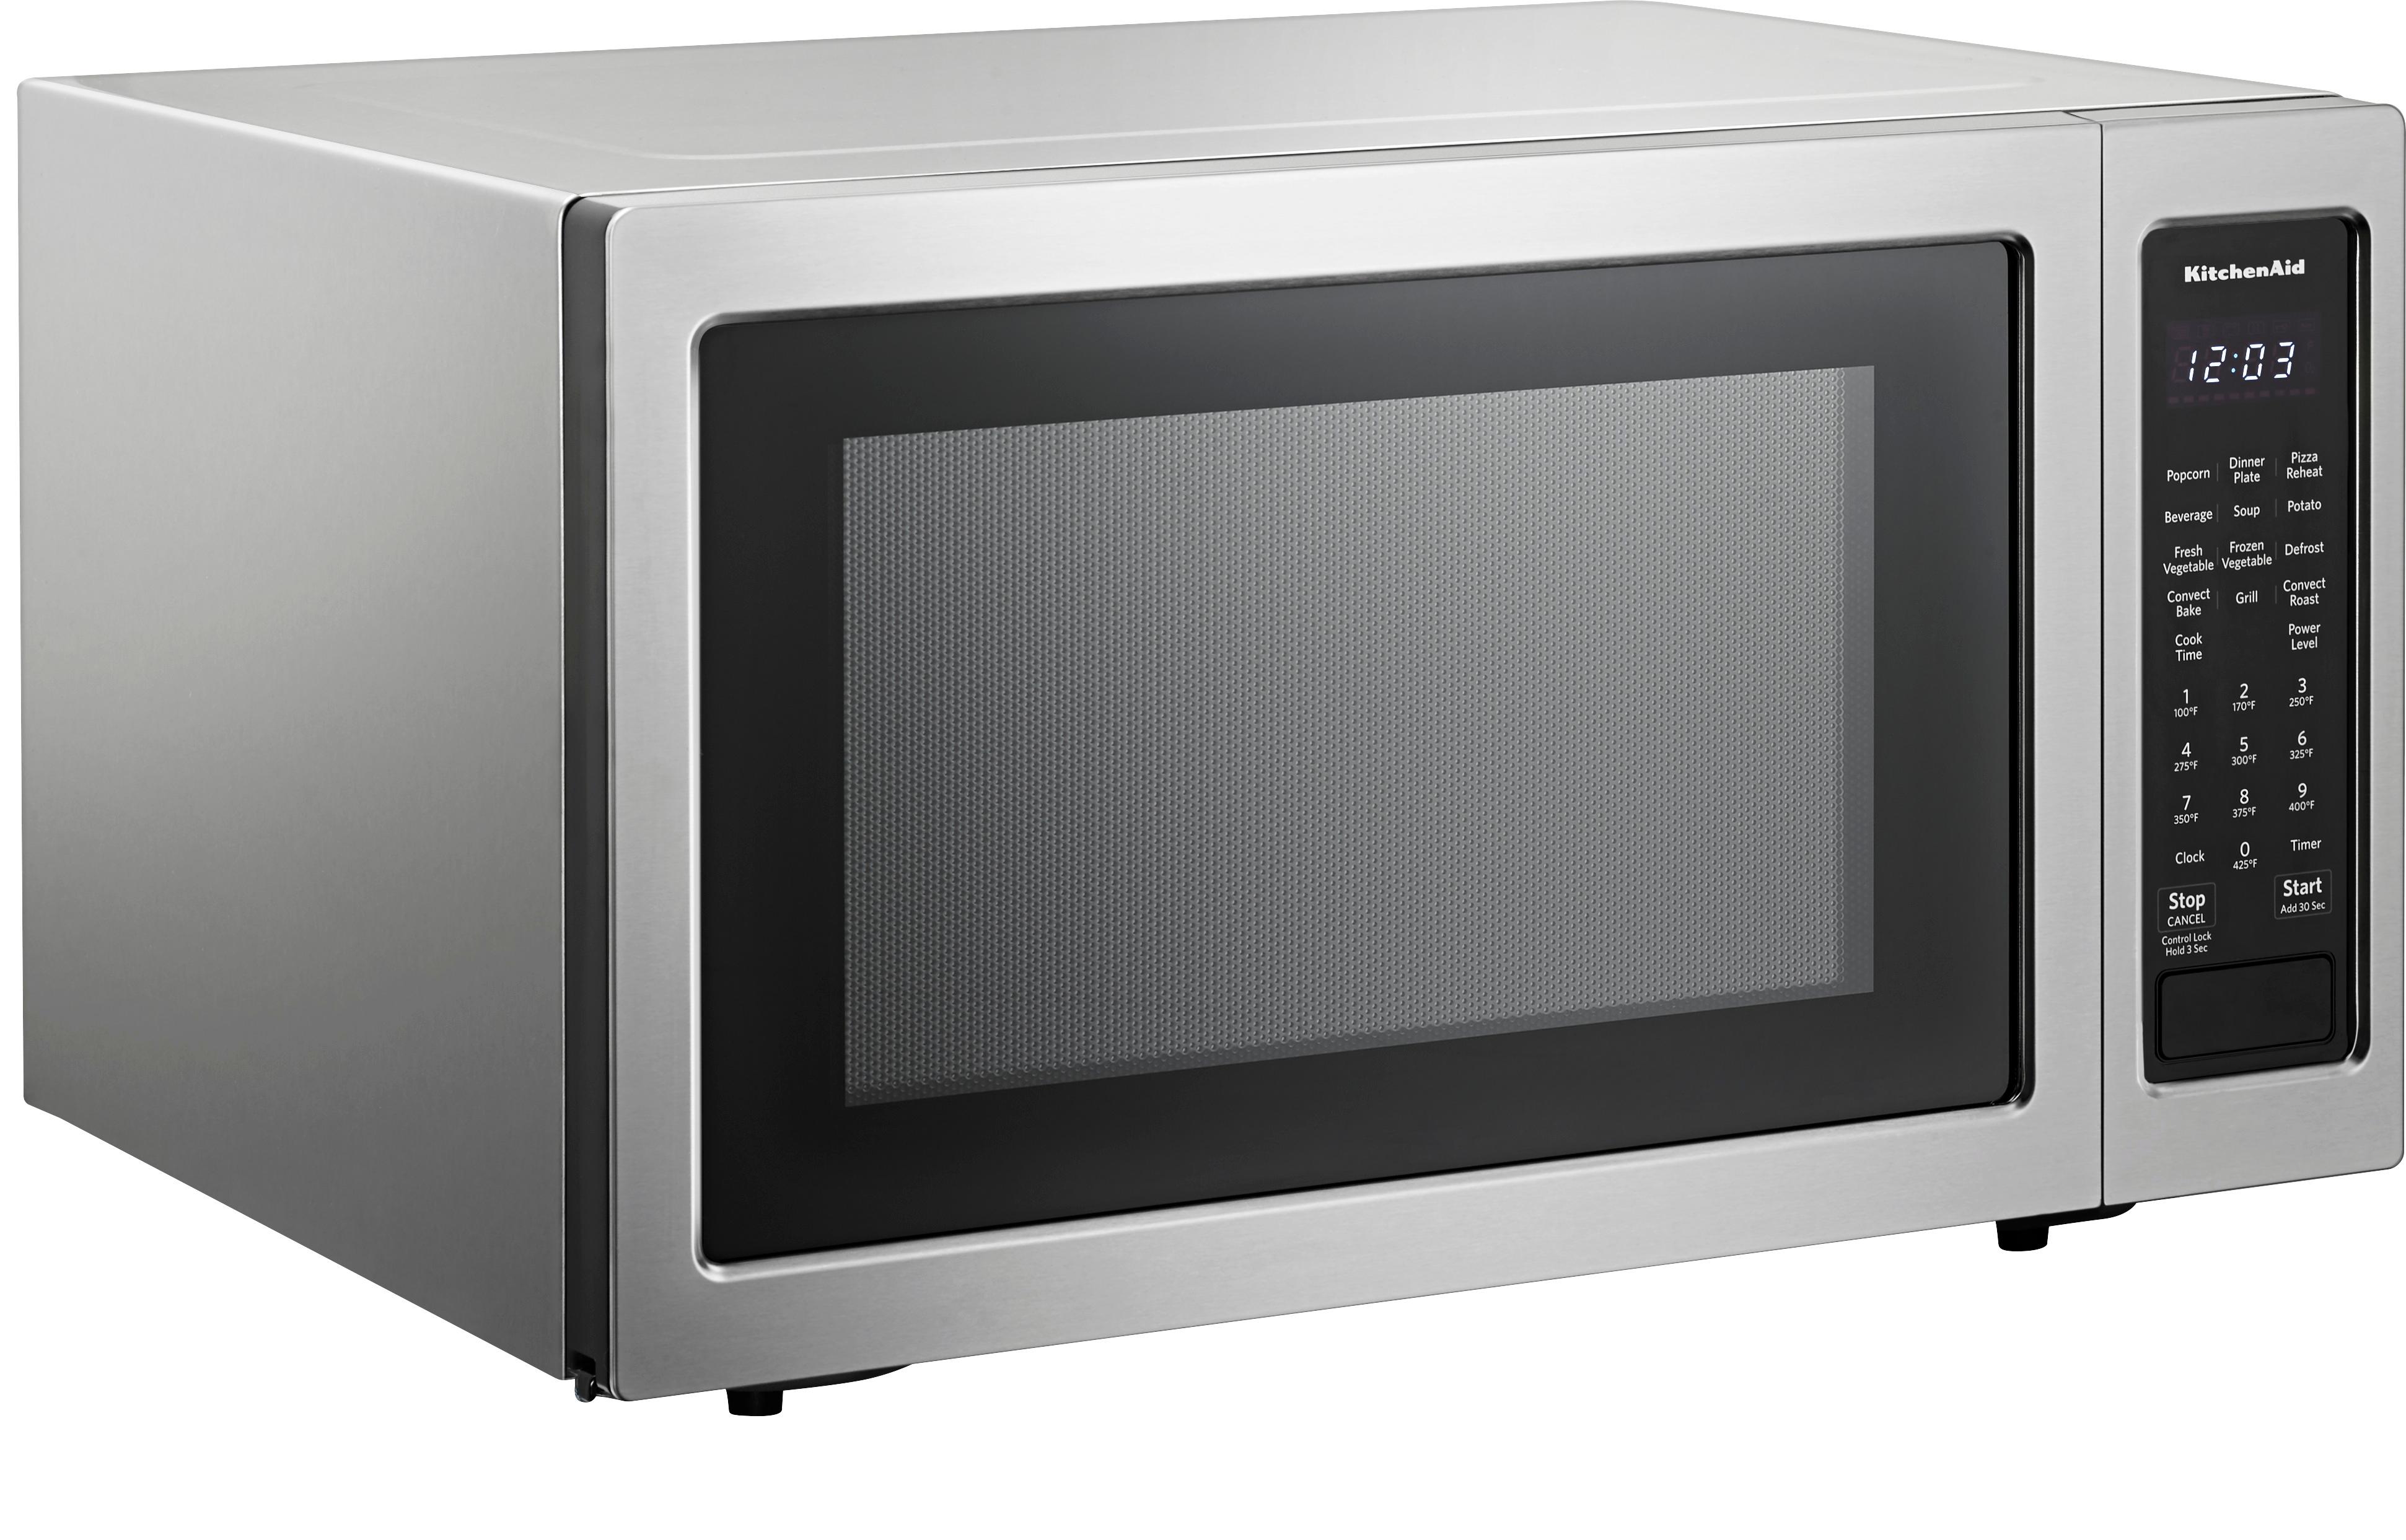 Angle View: KitchenAid - 1.5 Cu. Ft. Convection Microwave with Sensor Cooking and Grilling - Stainless steel